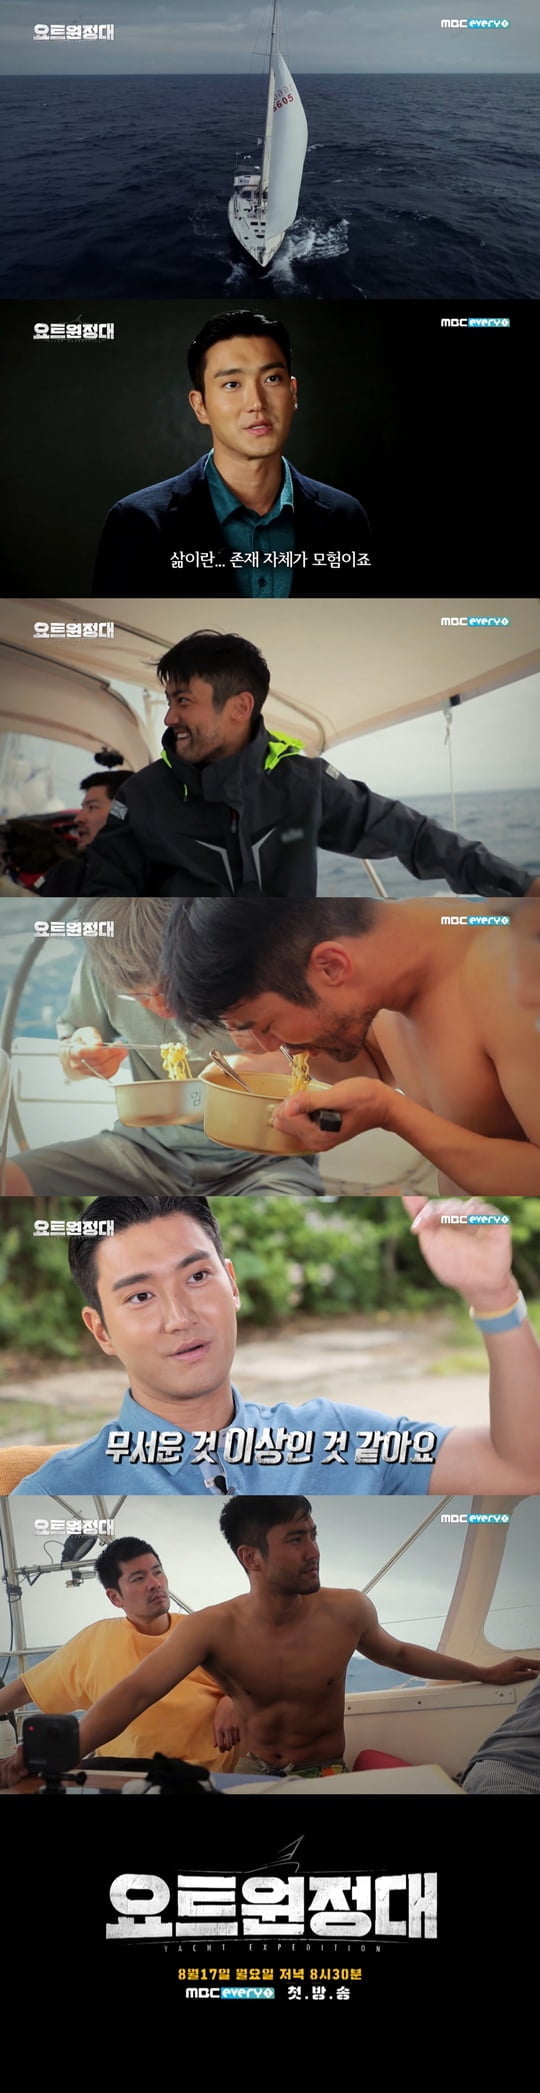 The rough adventure of Choi Siwon, yacht expedition, begins.MBC Everlons yacht expedition will be broadcast for the first time on Monday, 17th.The yacht Expedition is a documentary entertainment program that shows the process of challenging the Pacific Ocean voyage by four men who dreamed of adventure.Captain Kim Seung-jin, who succeeded in traveling around the world alone with the first weaponless port in Korea, and four men, Jin Goo, Choi Siwon, Chang Kiha and Song Ho-joon, leave for Pacific Ocean.Earlier, the Yacht Expeditionary Team revealed the characters announcement Jin Goo, which attracted attention.In the character preview, Jin Goo was enthusiastic in the rising waves and the heavy rains, and expected to be the second Earth.In the meantime, Choi Siwon, the second character of the yacht expedition, was released.The yacht Expedition character preview Choi Siwon begins with a voice of one yacht shaking at stake, Choi Siwons It will not be easy for us to sail on top of it.Then, Choi Siwon, who is sailing on the actual yacht, is revealed without hesitation.Choi Siwon was motion sick on a shaking yacht, or hit by a water slap because of unstoppable waves.The scenes that follow are also the shock itself.Choi Siwon, who grew up with a beard, took off his top and inhaled ramen on the yacht, falling and falling in a shaking wave.If Choi Siwon, a synonym for health, has been shaken to this extent, I am more curious about what the situation has been.Choi Siwon, who was excited that life is an adventure itself, said, I think it is more than scary.The production team of the yacht expedition was also confident of the second real Earth, which was not seen in any entertainment.The first broadcast of MBC Everlon yacht Expedition is expected to be broadcast on the Pacific Ocean navigator, which is a blockbuster of Jin Goo, Choi Siwon, Chang Kiha and Song Ho-joon.The first broadcast on Monday, August 17 at 8:30 p.m.